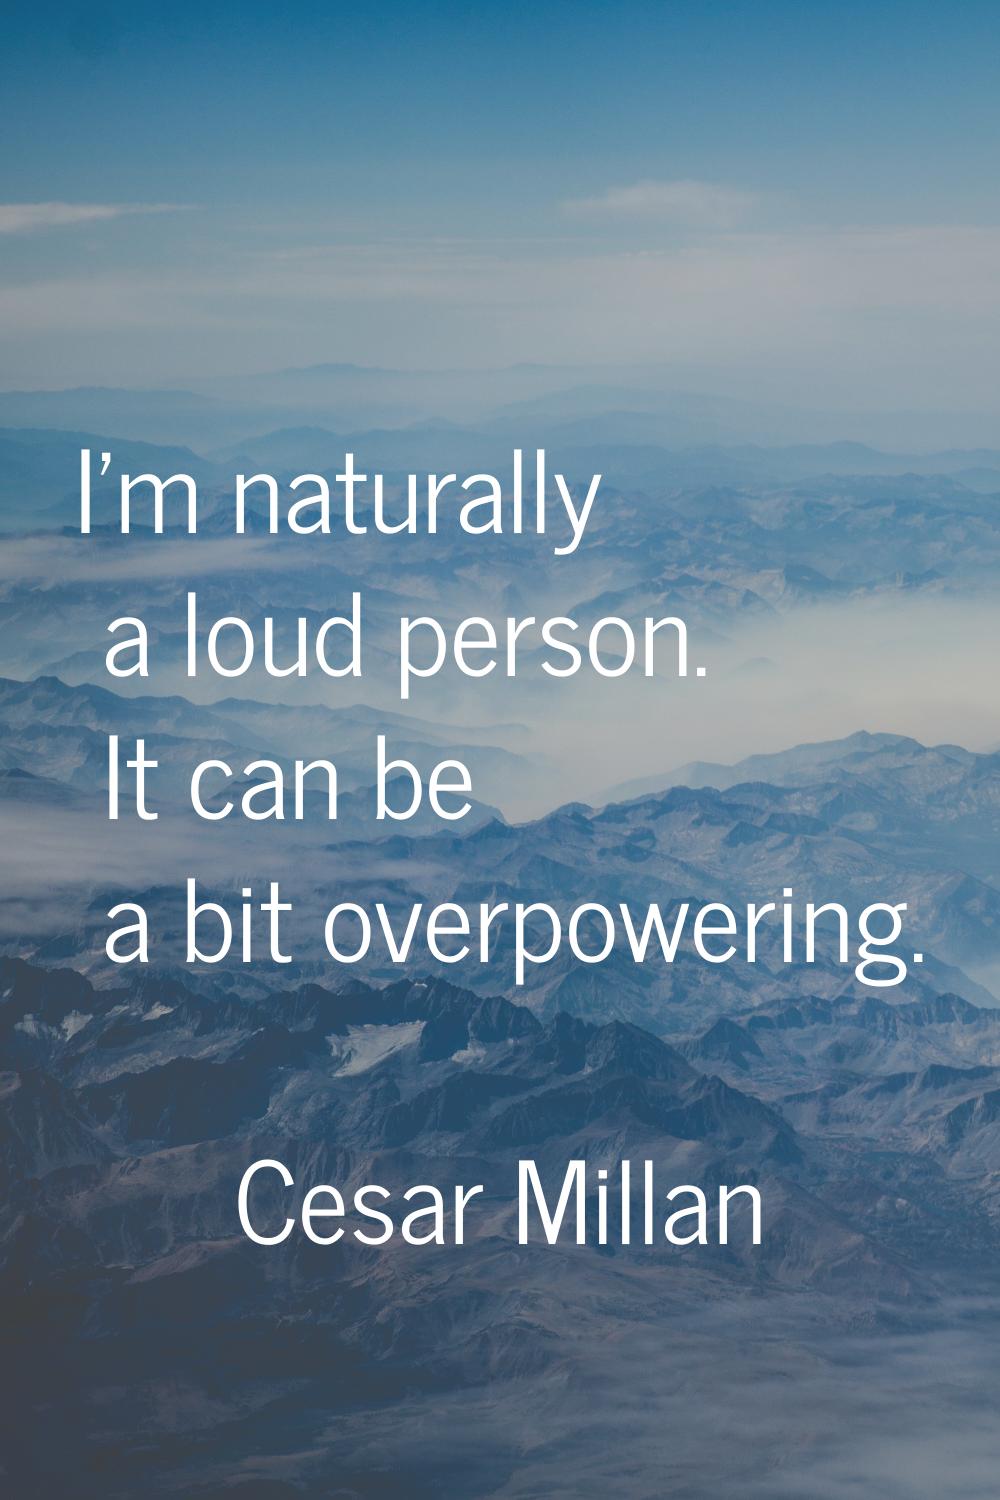 I'm naturally a loud person. It can be a bit overpowering.